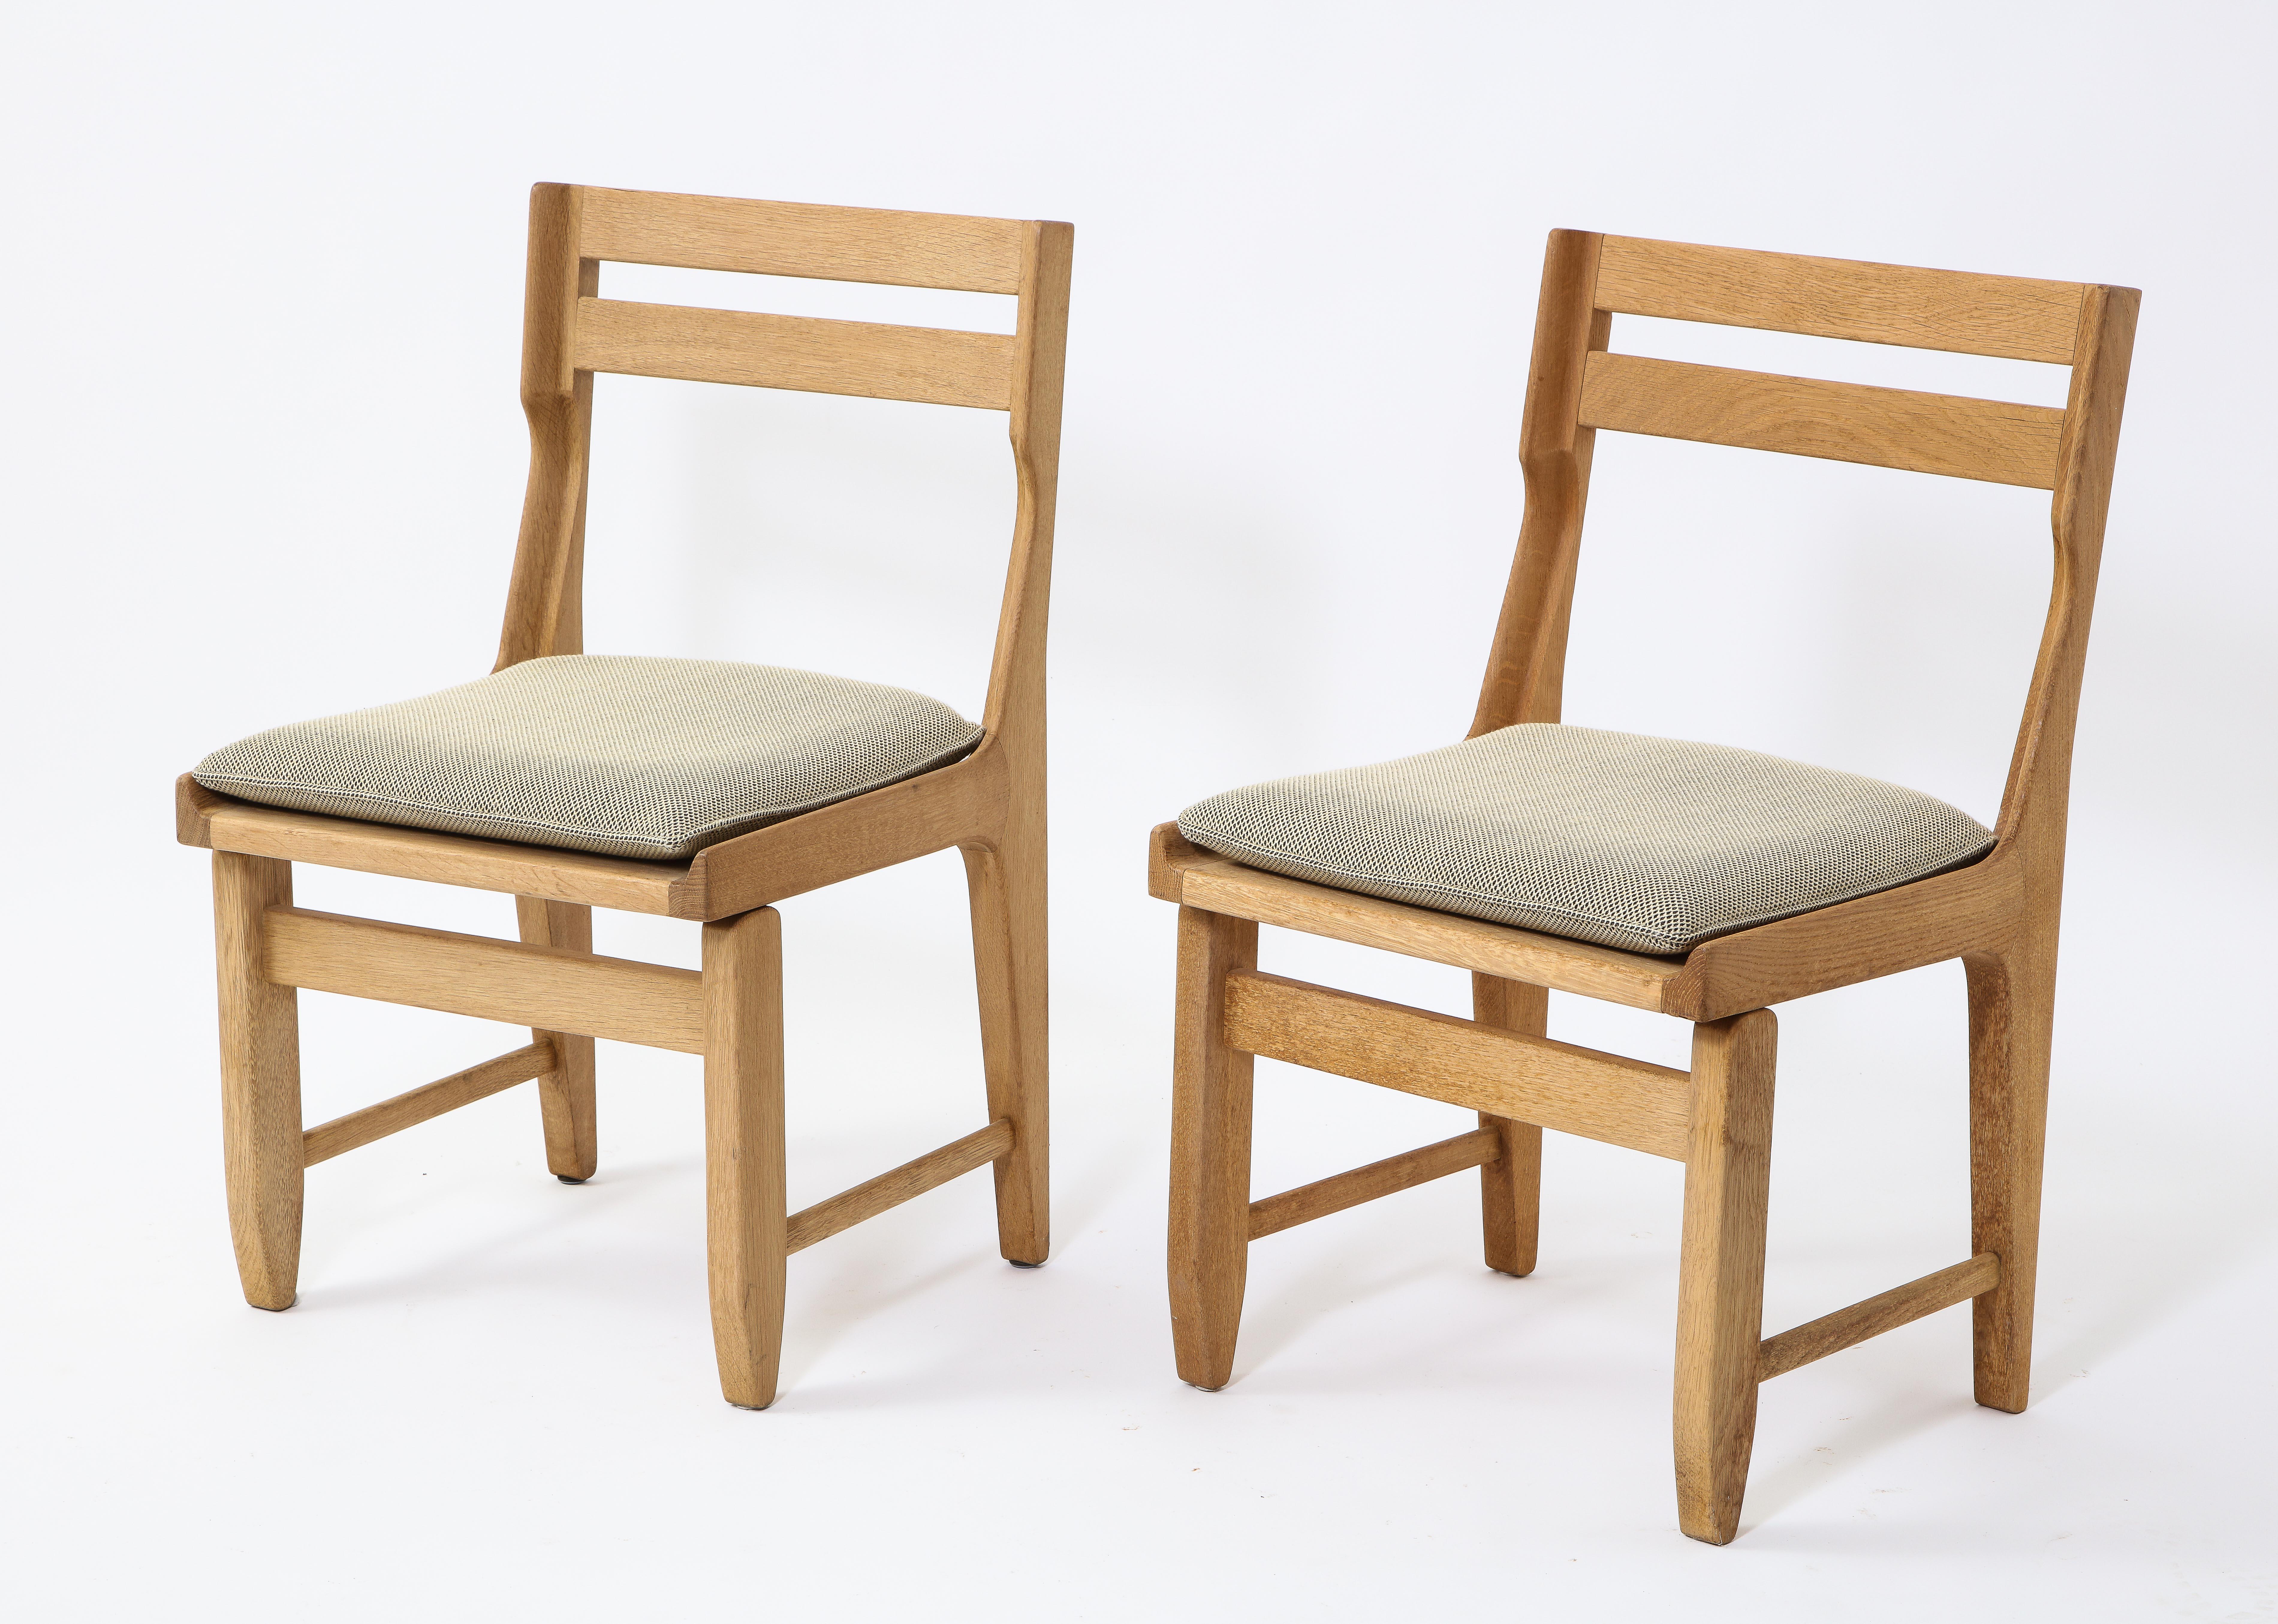 Solid oak chairs by Editions Votre Maison. Designed by Guillerme and Chambron. Beautifully crafted dovetail details.

Original upholstery and light green wool fabric cushion in good vintage condition.